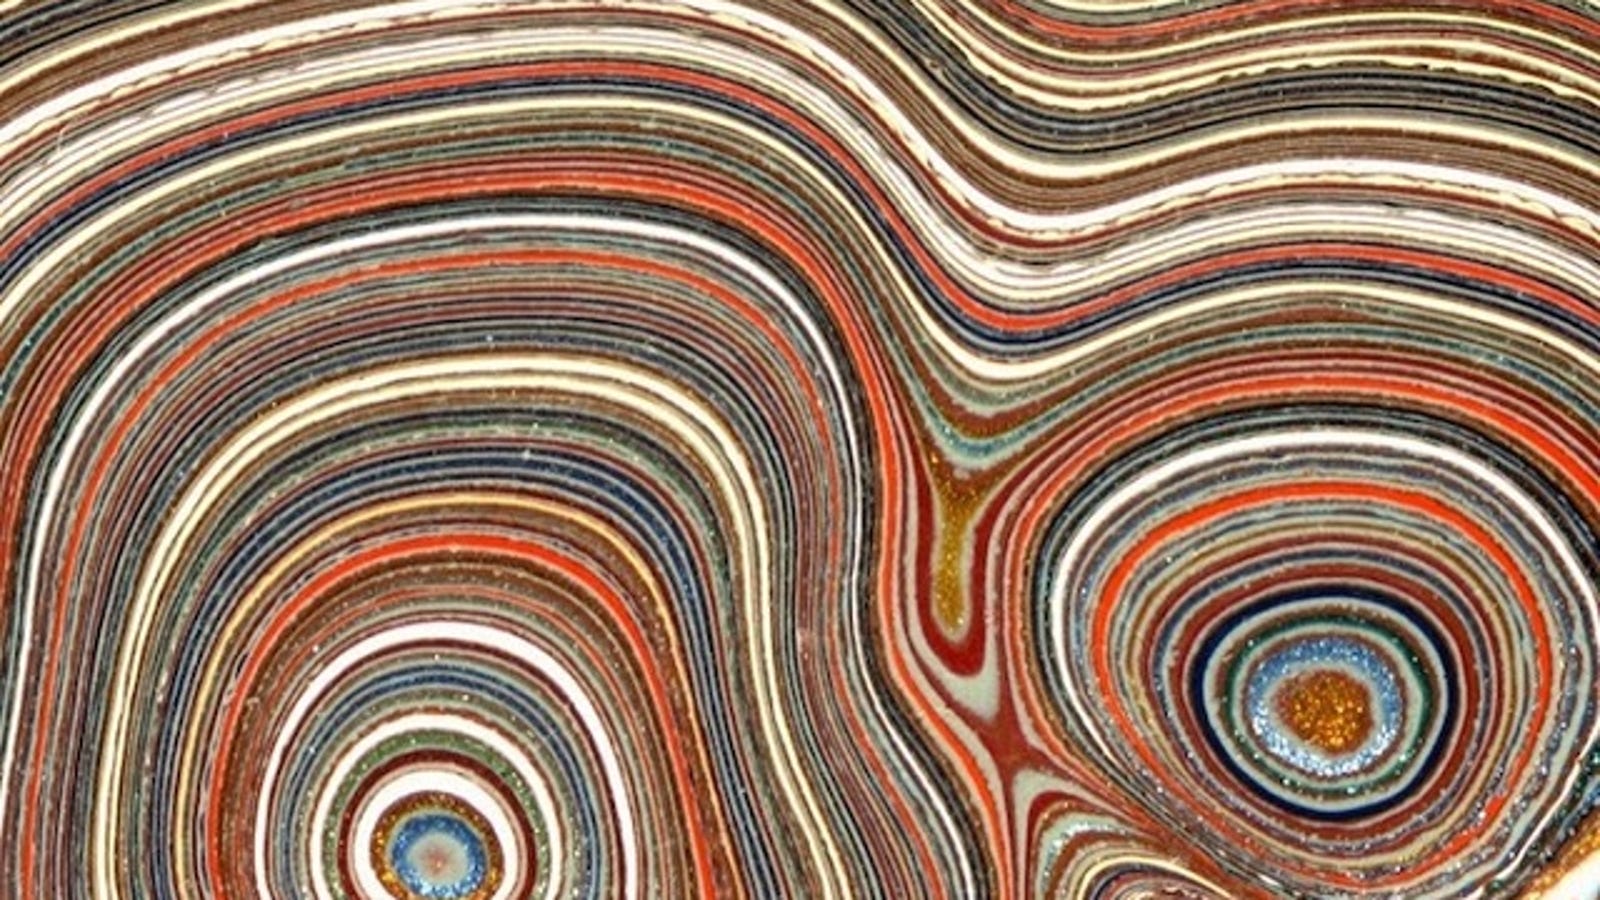 The Beautiful Stones Created By Layers of Car Paint